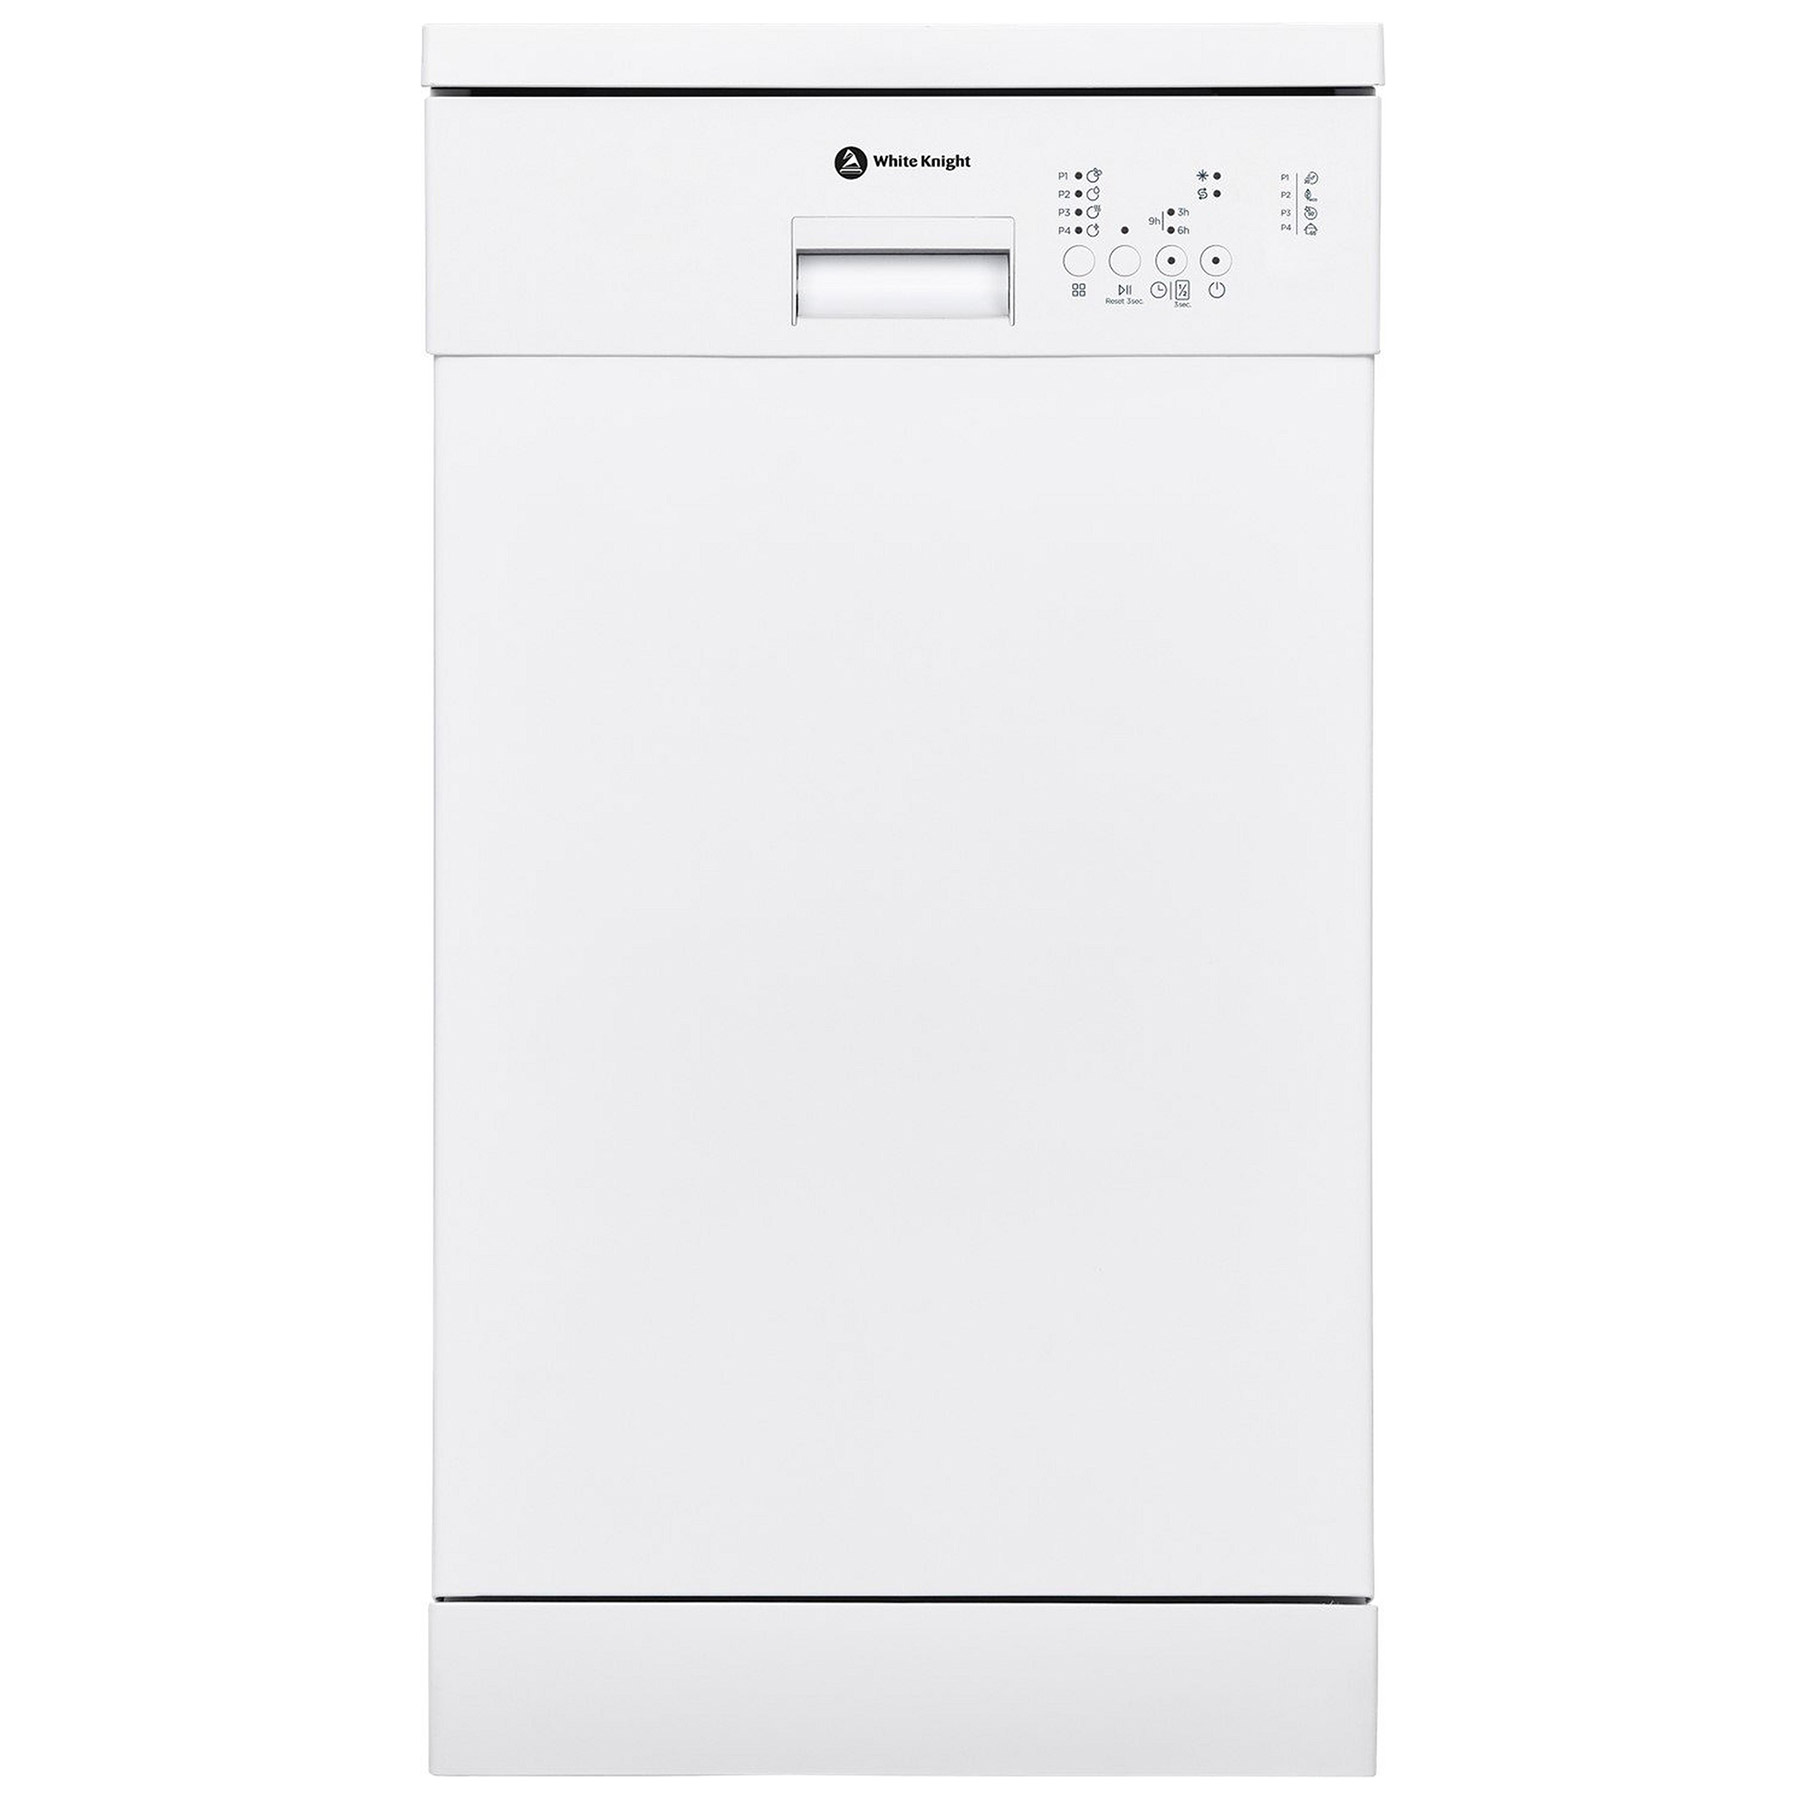 Image of White Knight FS45DW52W 45cm Dishwasher in White 10 Place Settings E Ra